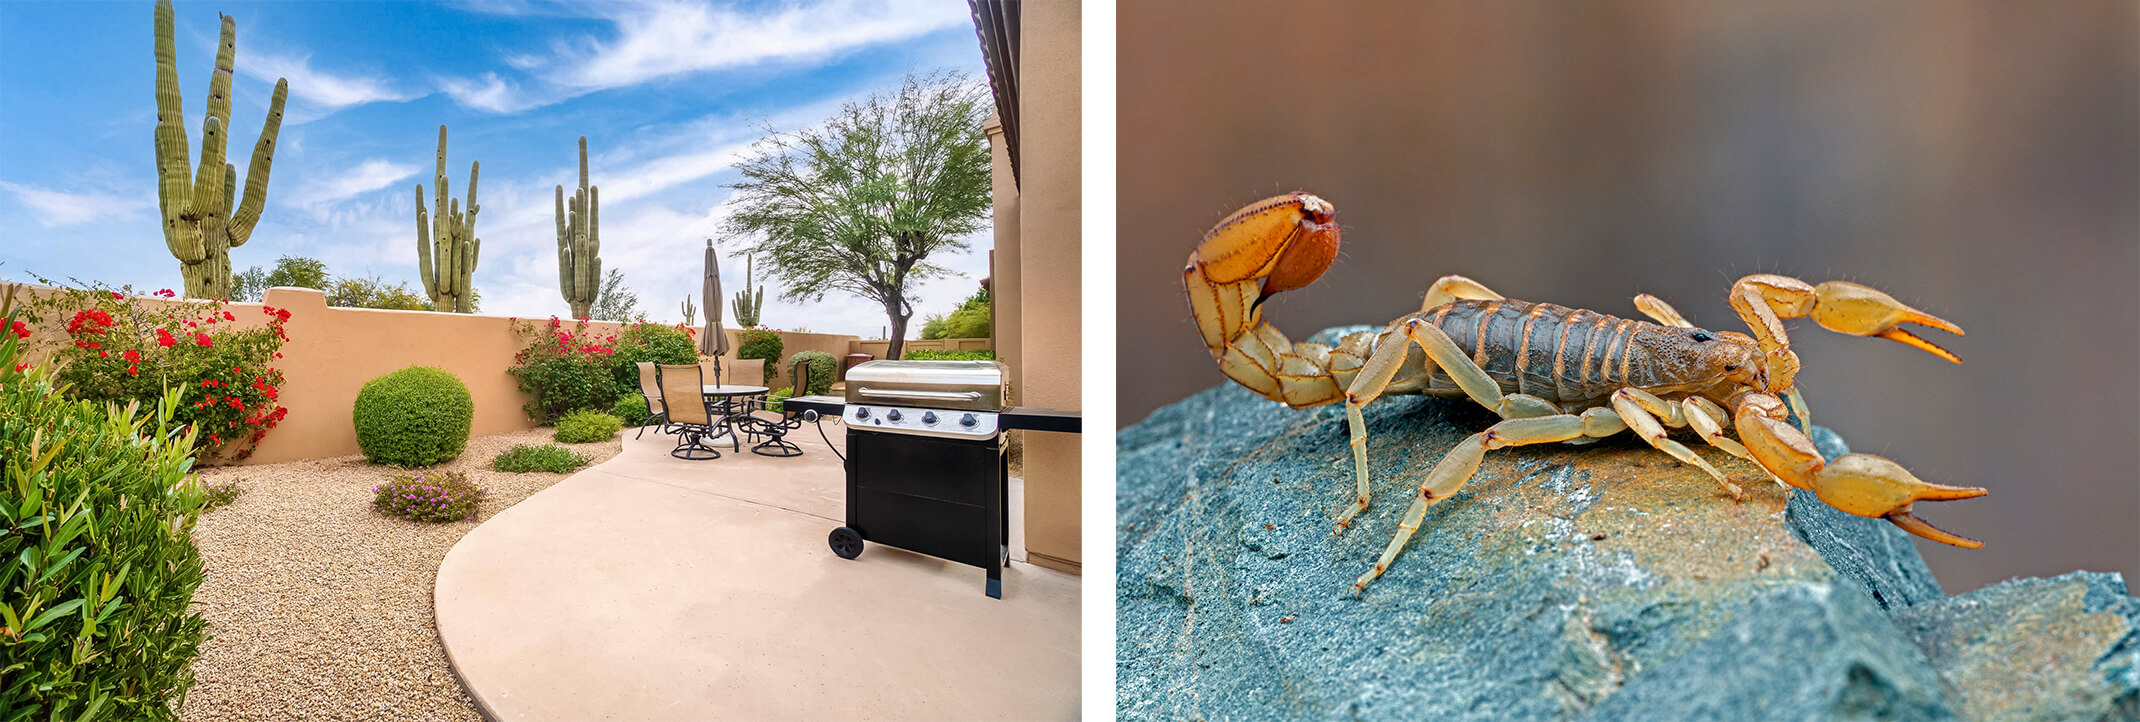 A tidy desert backyard with plants, seating and a BBQ, and a closeup of a scorpion on a rock.